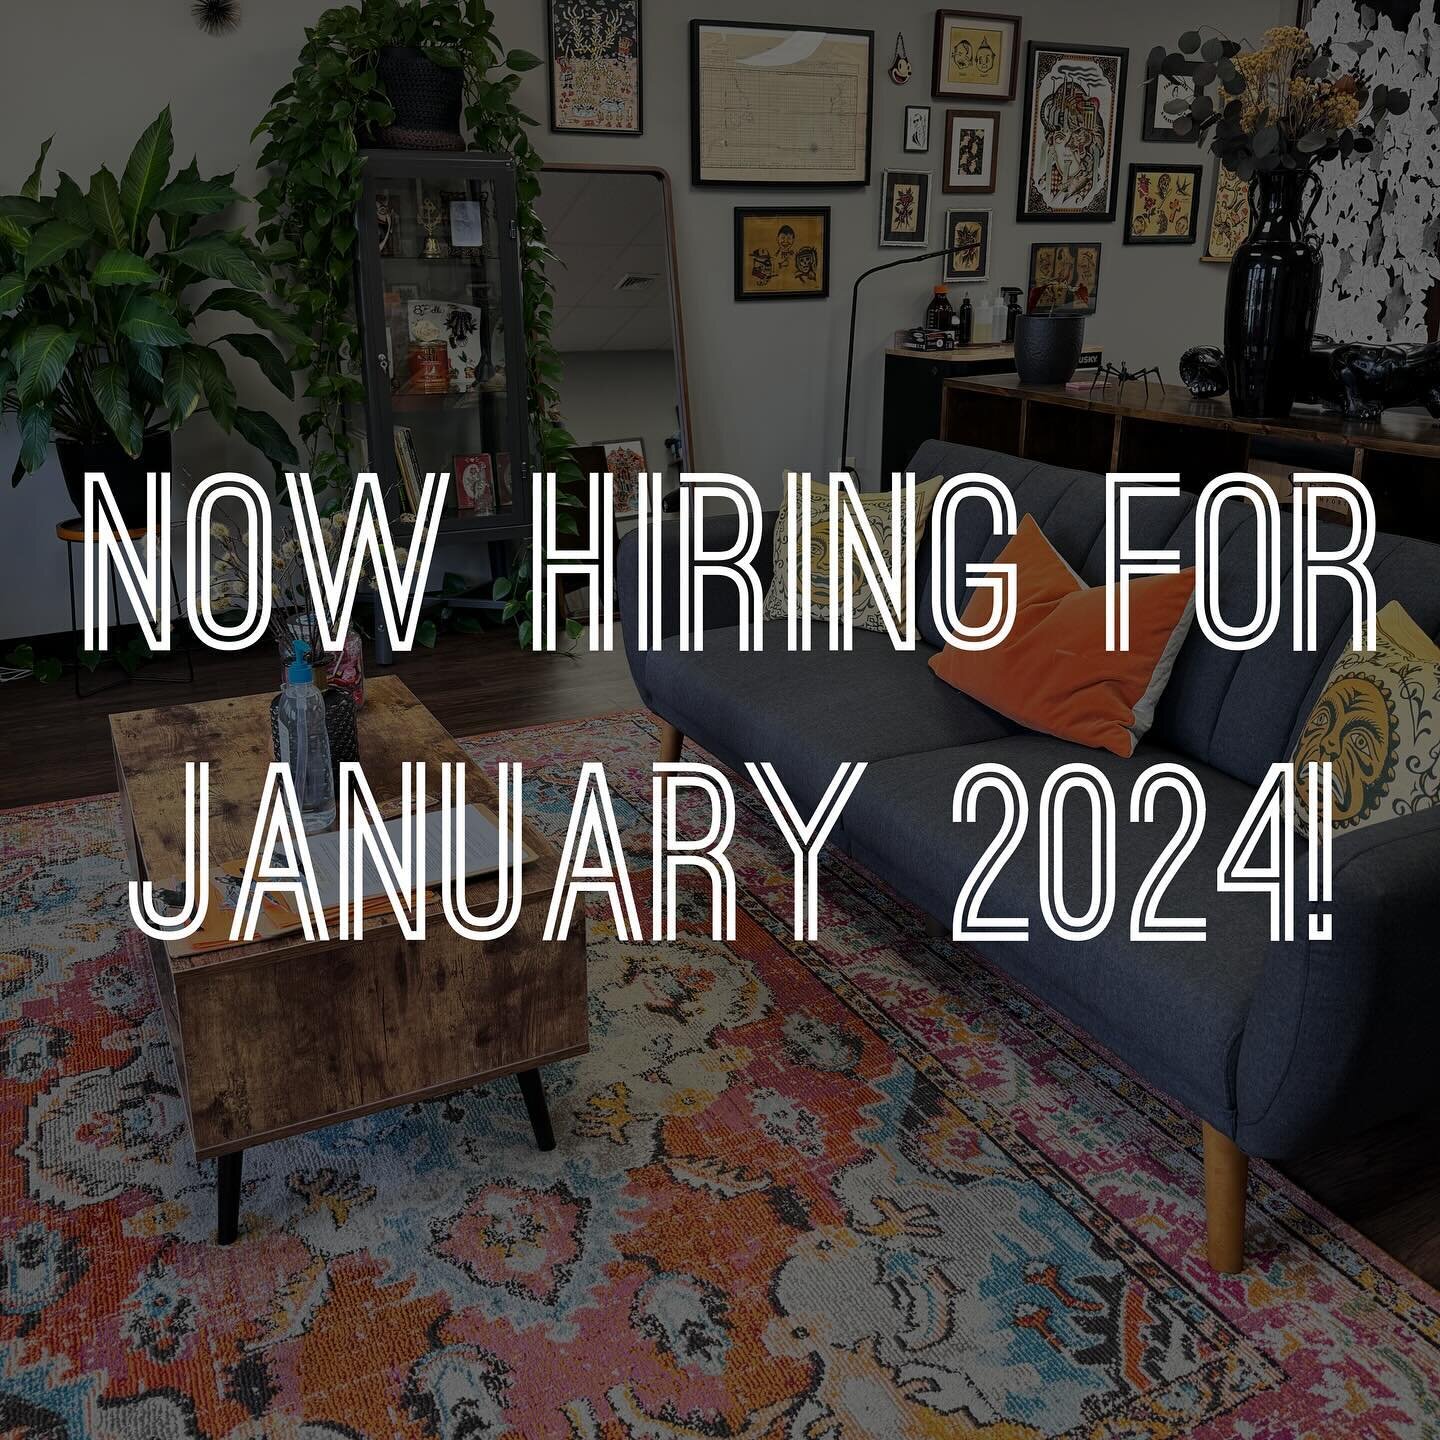 We are looking for one super talented artist to join the Eight Bells crew in January. All styles are welcome! Please reach out if interested!